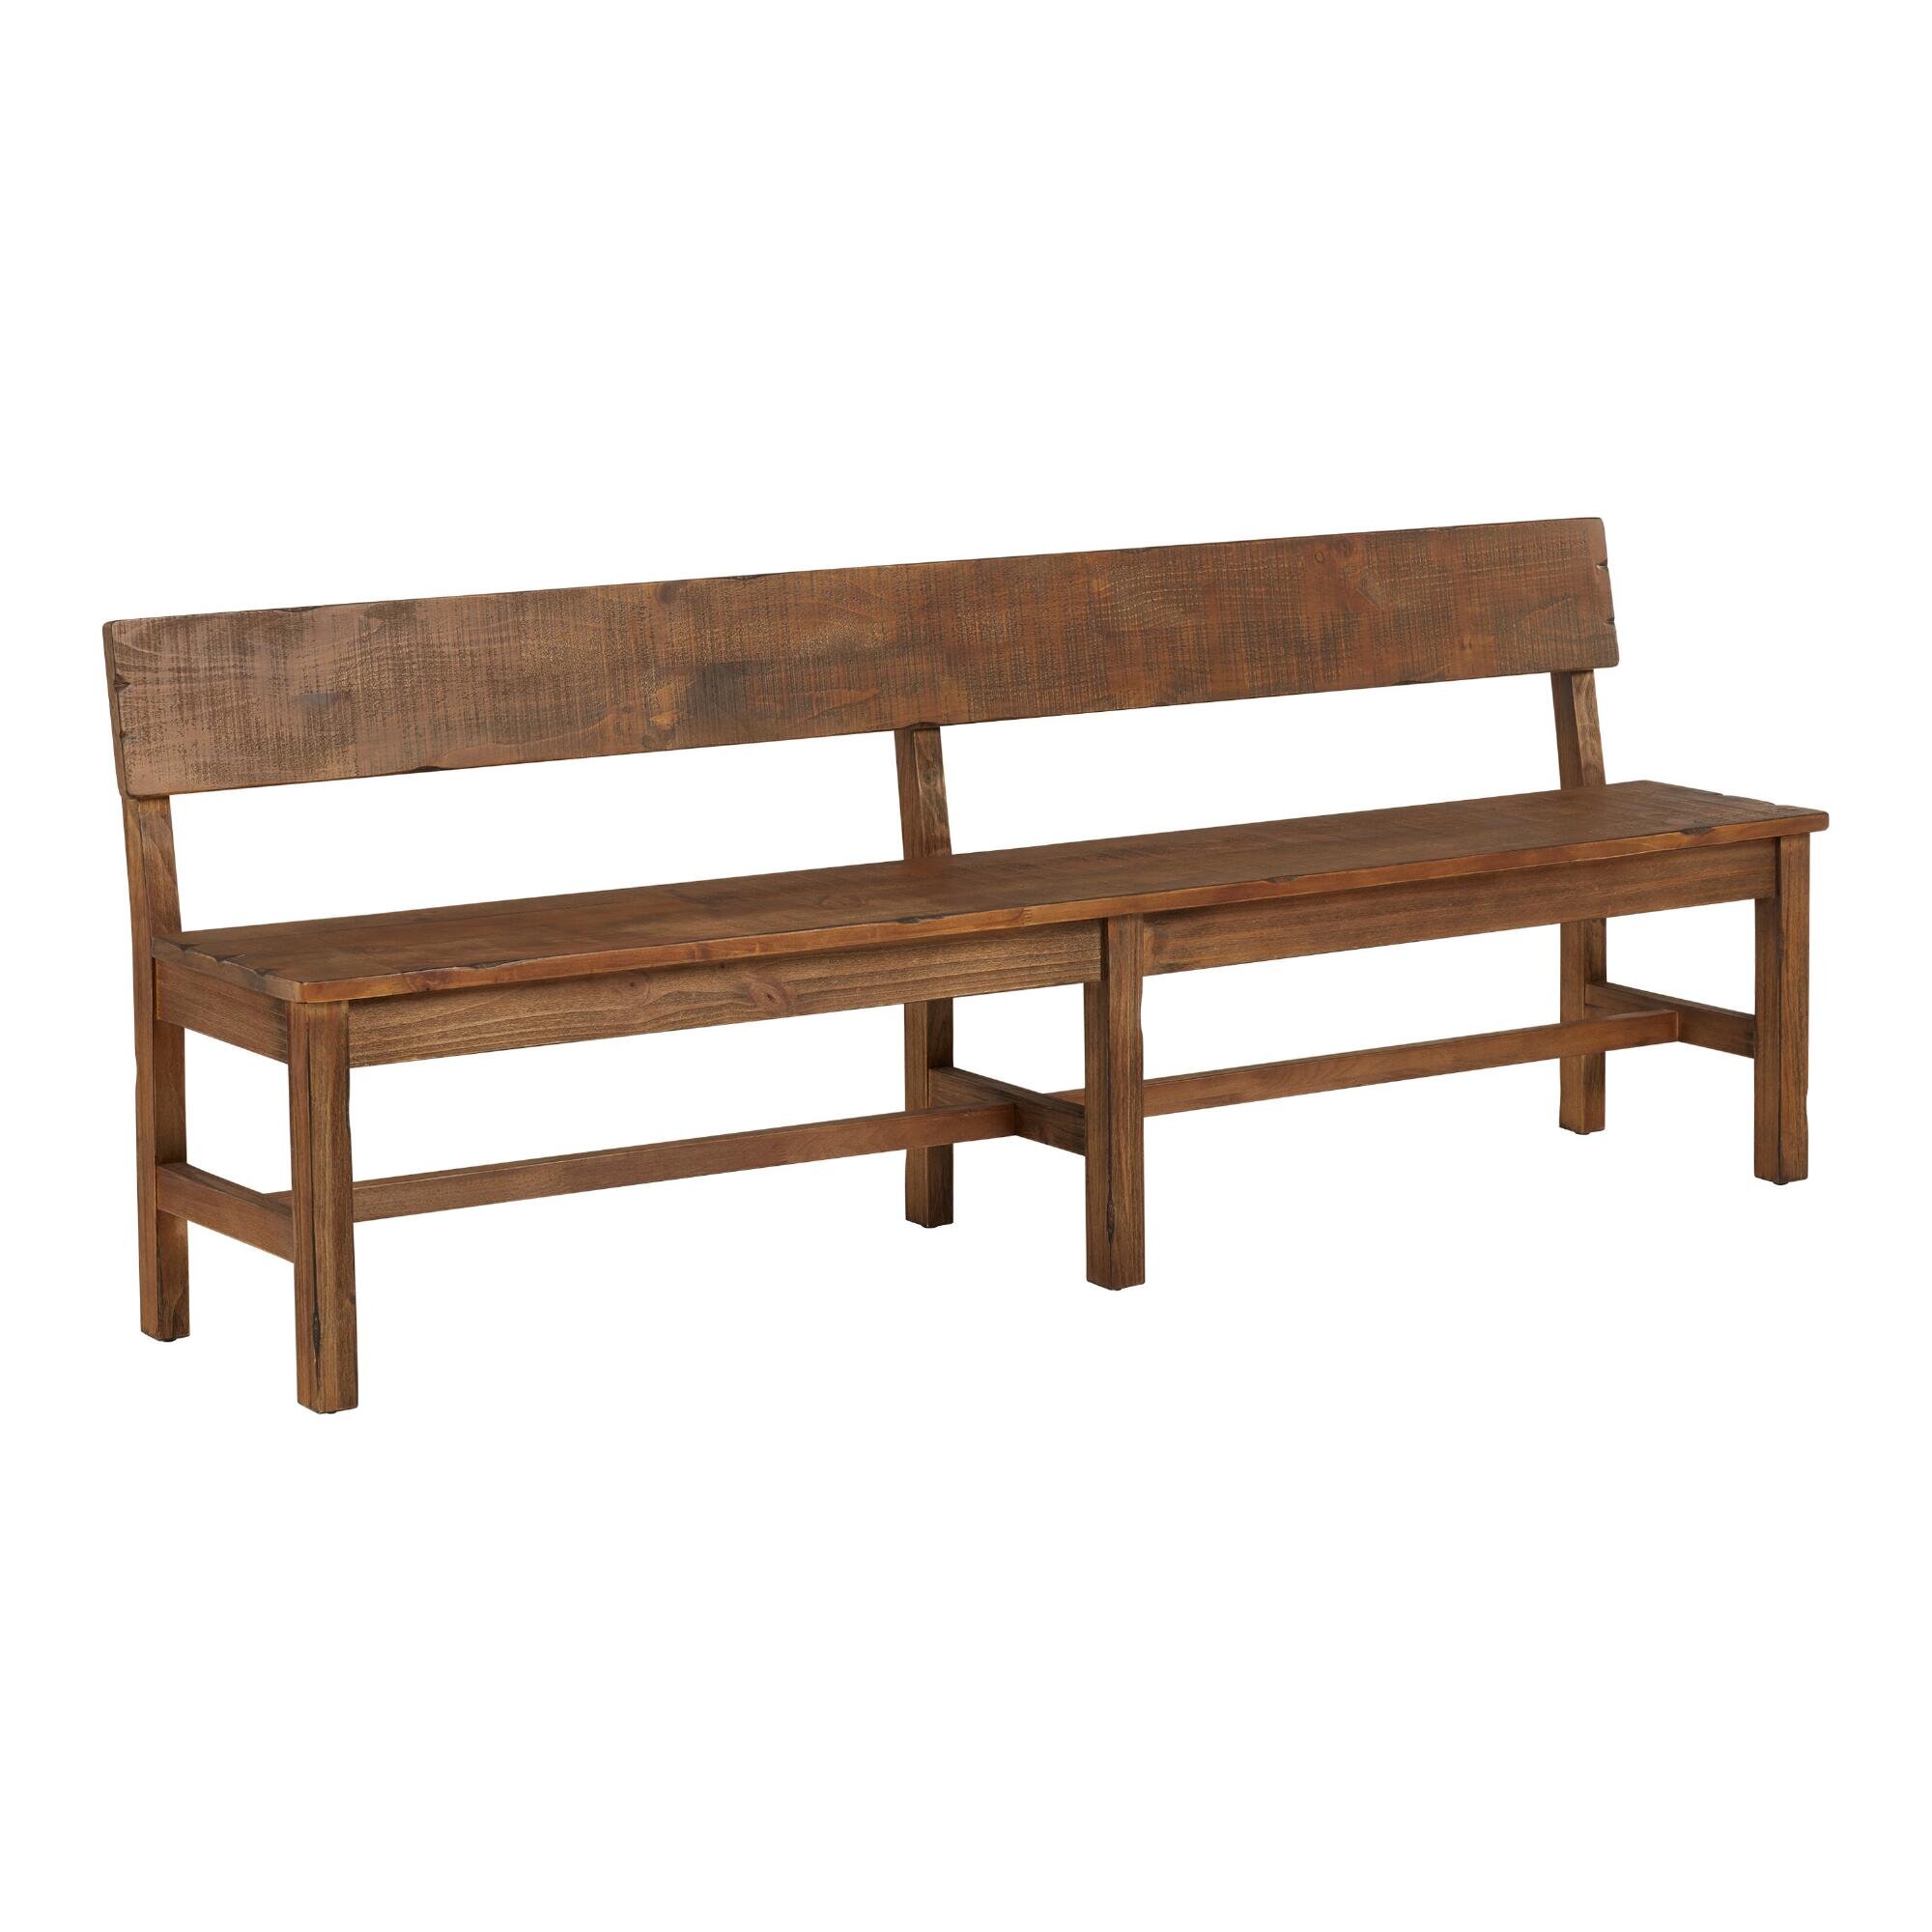 World Market - Distressed Brown Wood Gulianna Extra Long Dining Bench - $399.99